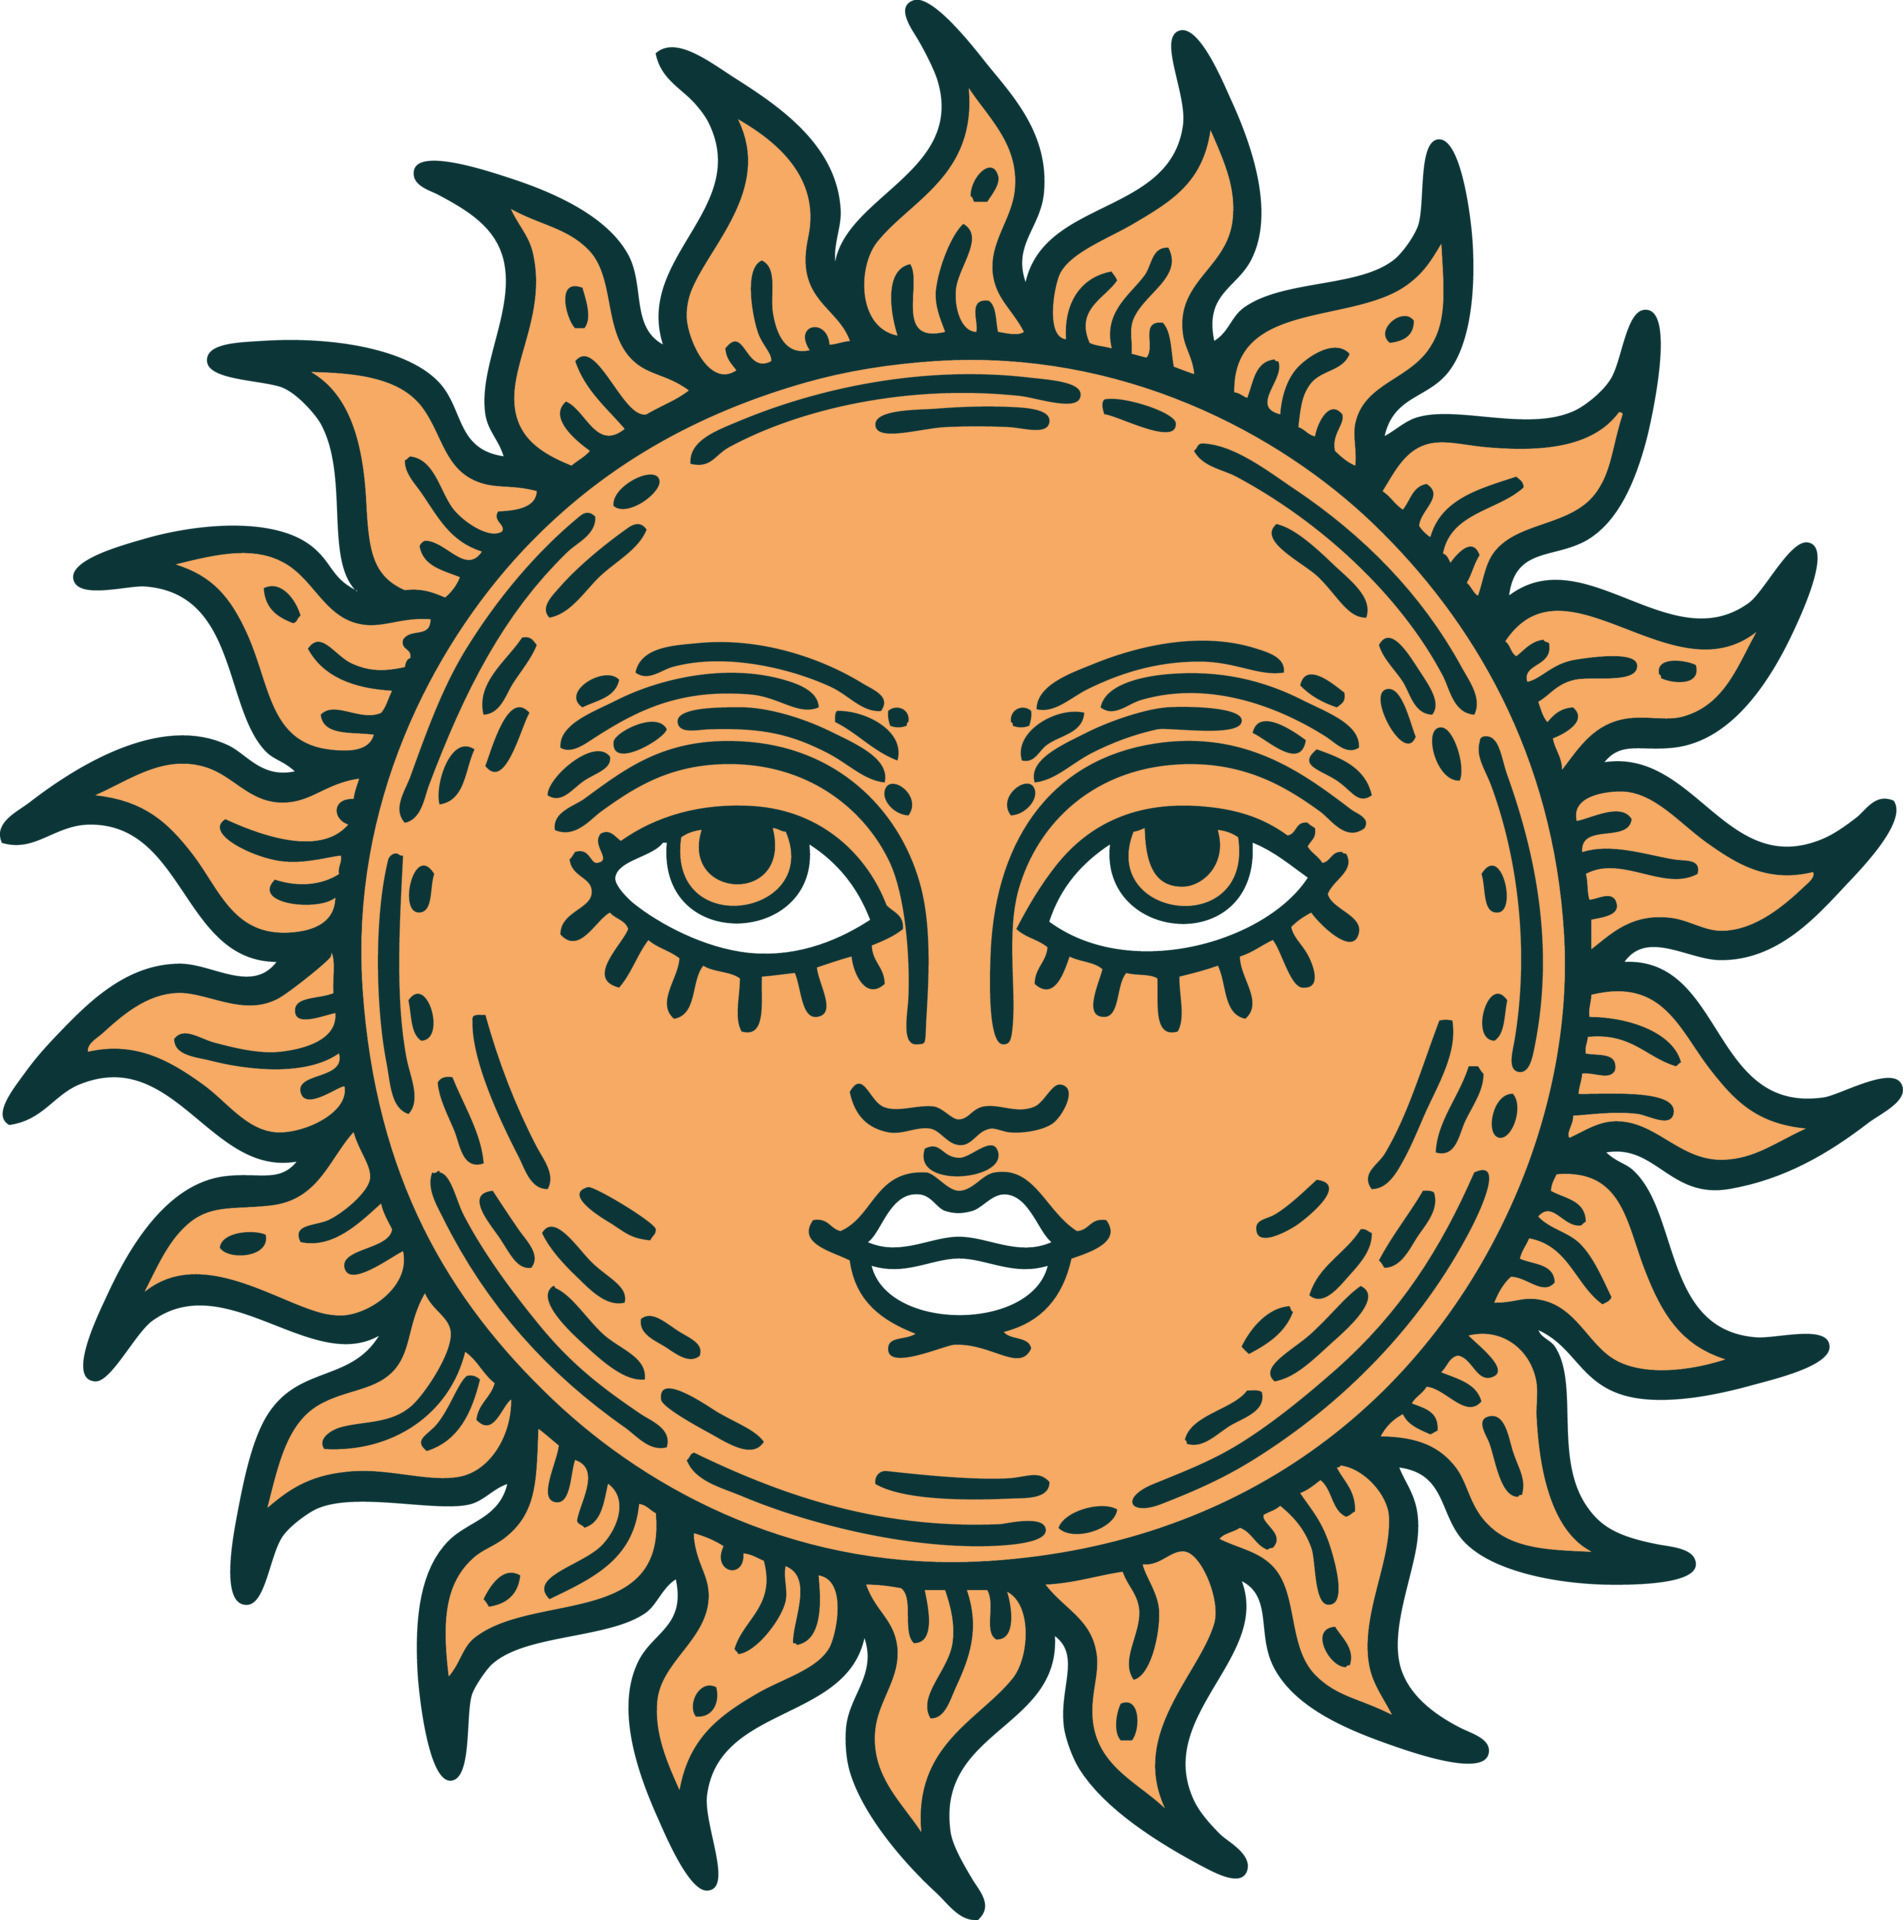 The Sun With Face Mystical Heaven Hand Drawn Illustration Sketch Style  Astrology And Witchcraft Symbol Engrave Vintage Stylized Vector Drawing  Stock Illustration  Download Image Now  iStock